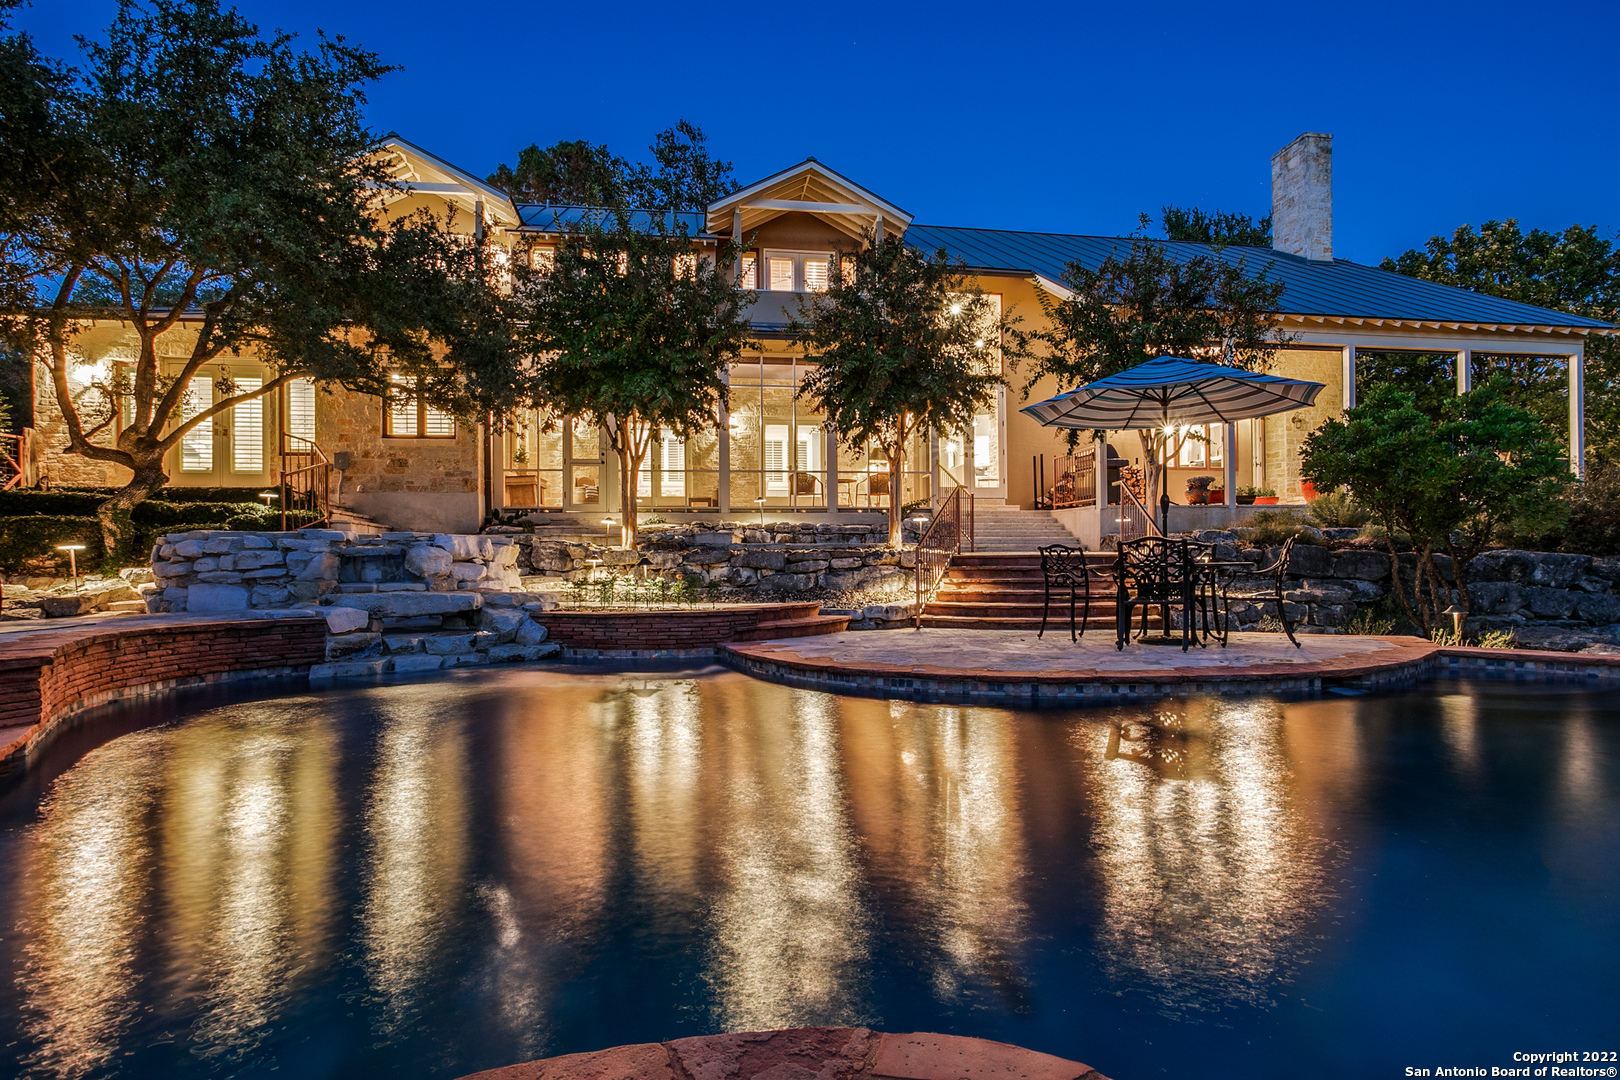 Designed by renowned architect Joe Stubblefield, this impeccable split-level home offers access to the incredible luxury found in Sendero Ranch. Immediately past the grand French entry doors embedded into a stunning limestone exterior is a unified living space with a 2-story vaulted ceiling, anchored around an impressive stone fireplace flanked by floor-to-ceiling windows. Hardwood floors, stone accent walls and arched doorways can be found throughout the spacious interior. Granite counters, tile backsplash, stainless steel JennAir appliances and pendant lights over the breakfast bar provide the gourmet kitchen with a sense of refinement. Plantation shutters, custom  millwork, dual walk-in closets and a remarkable en suite bath with dual vanities, an open shower and a soaking tub embedded into a decorative tile backsplash with ornate mosaic accents allow residents to lavishly relax in the private primary suite. Wrought iron spindles guide the stairs up to a lofted space, which then leads to a guest suite with a kitchenette and two additional secondary suites. Balconies and a screened porch with Redondo tiles overlook the private backyard retreat, complete with a covered flagstone patio with outdoor fireplace, which extends down to a sparkling pool with  waterfall, spa, mature trees and xeriscaping, as well as well-maintained landscaping.